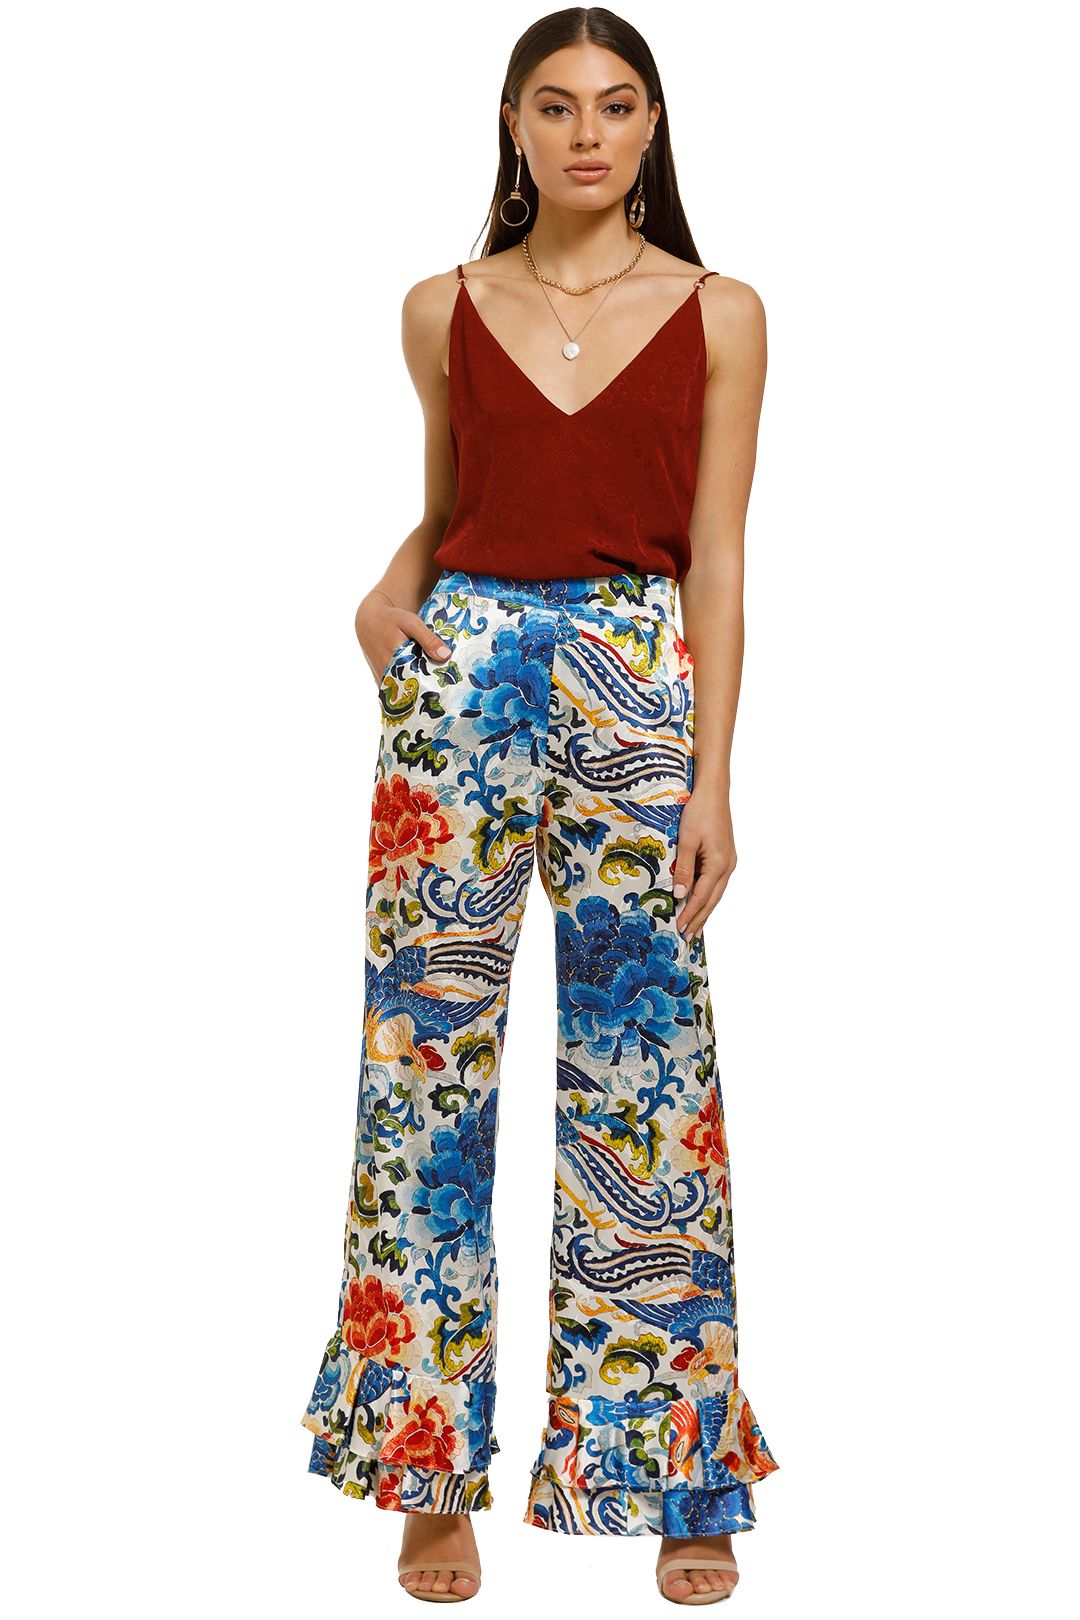 Cooper-By-Trelise-Cooper-Frilling-Feelings-Pant-Blue-Print-Front